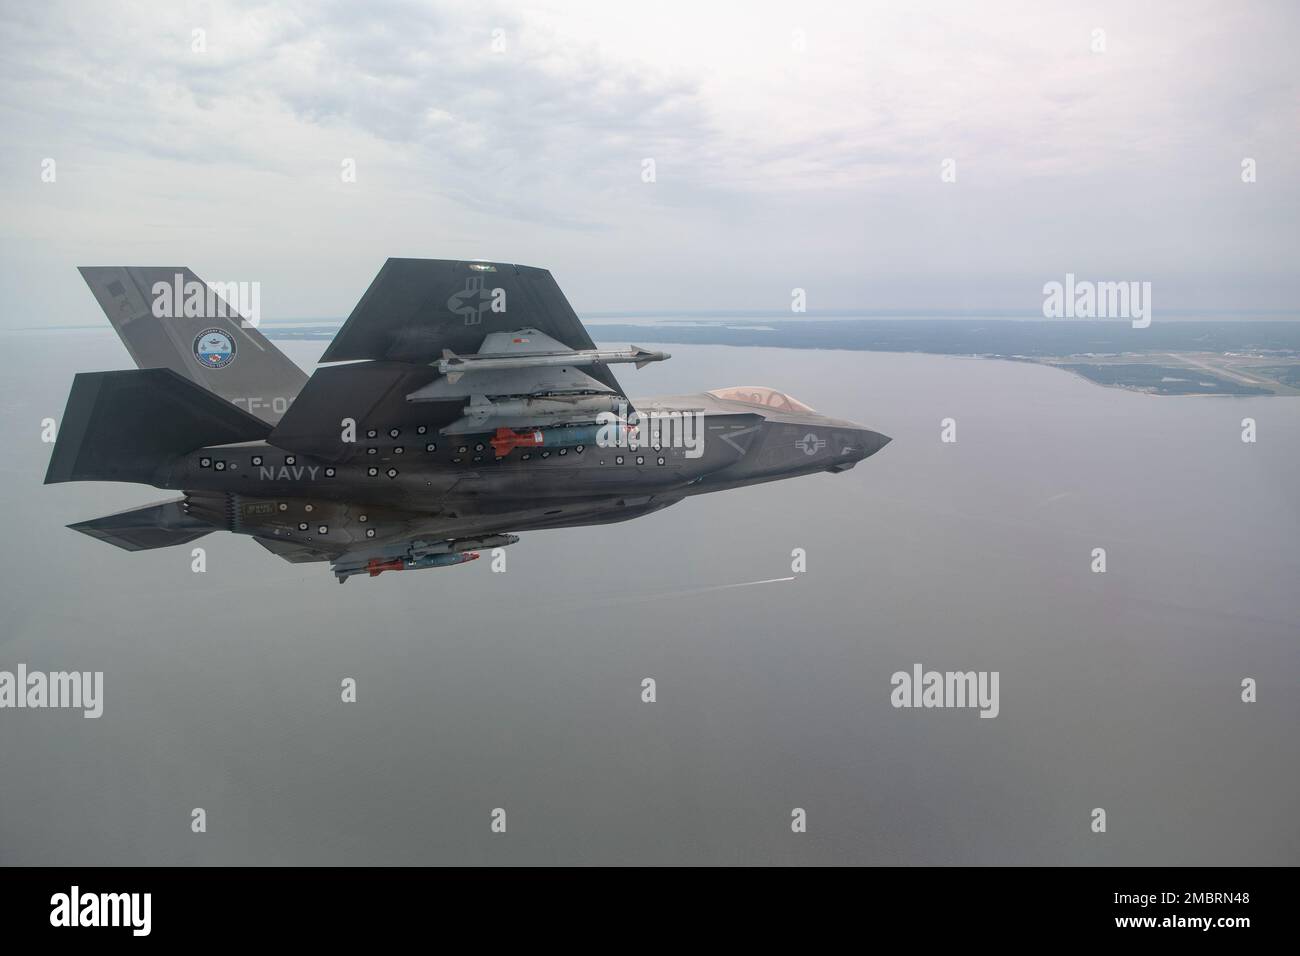 U.S. Marine Corps test pilot Maj. Dylan “Bilbo” Nicholas pilots an F-35C during a GBU-38/54 flight test at NAS Patuxent River, Maryland, on June 21, 2022. Before new weapons and aircraft capabilities are integrated into operational fleet squadrons the Pax River F-35 Integrated Test Force and Air Test and Evaluation Squadron (VX) 23 developmental test pilots thoroughly test them. The F-35, which has been operational since 2015, is the most lethal, survivable, and interoperable fighter aircraft ever built. Stock Photo